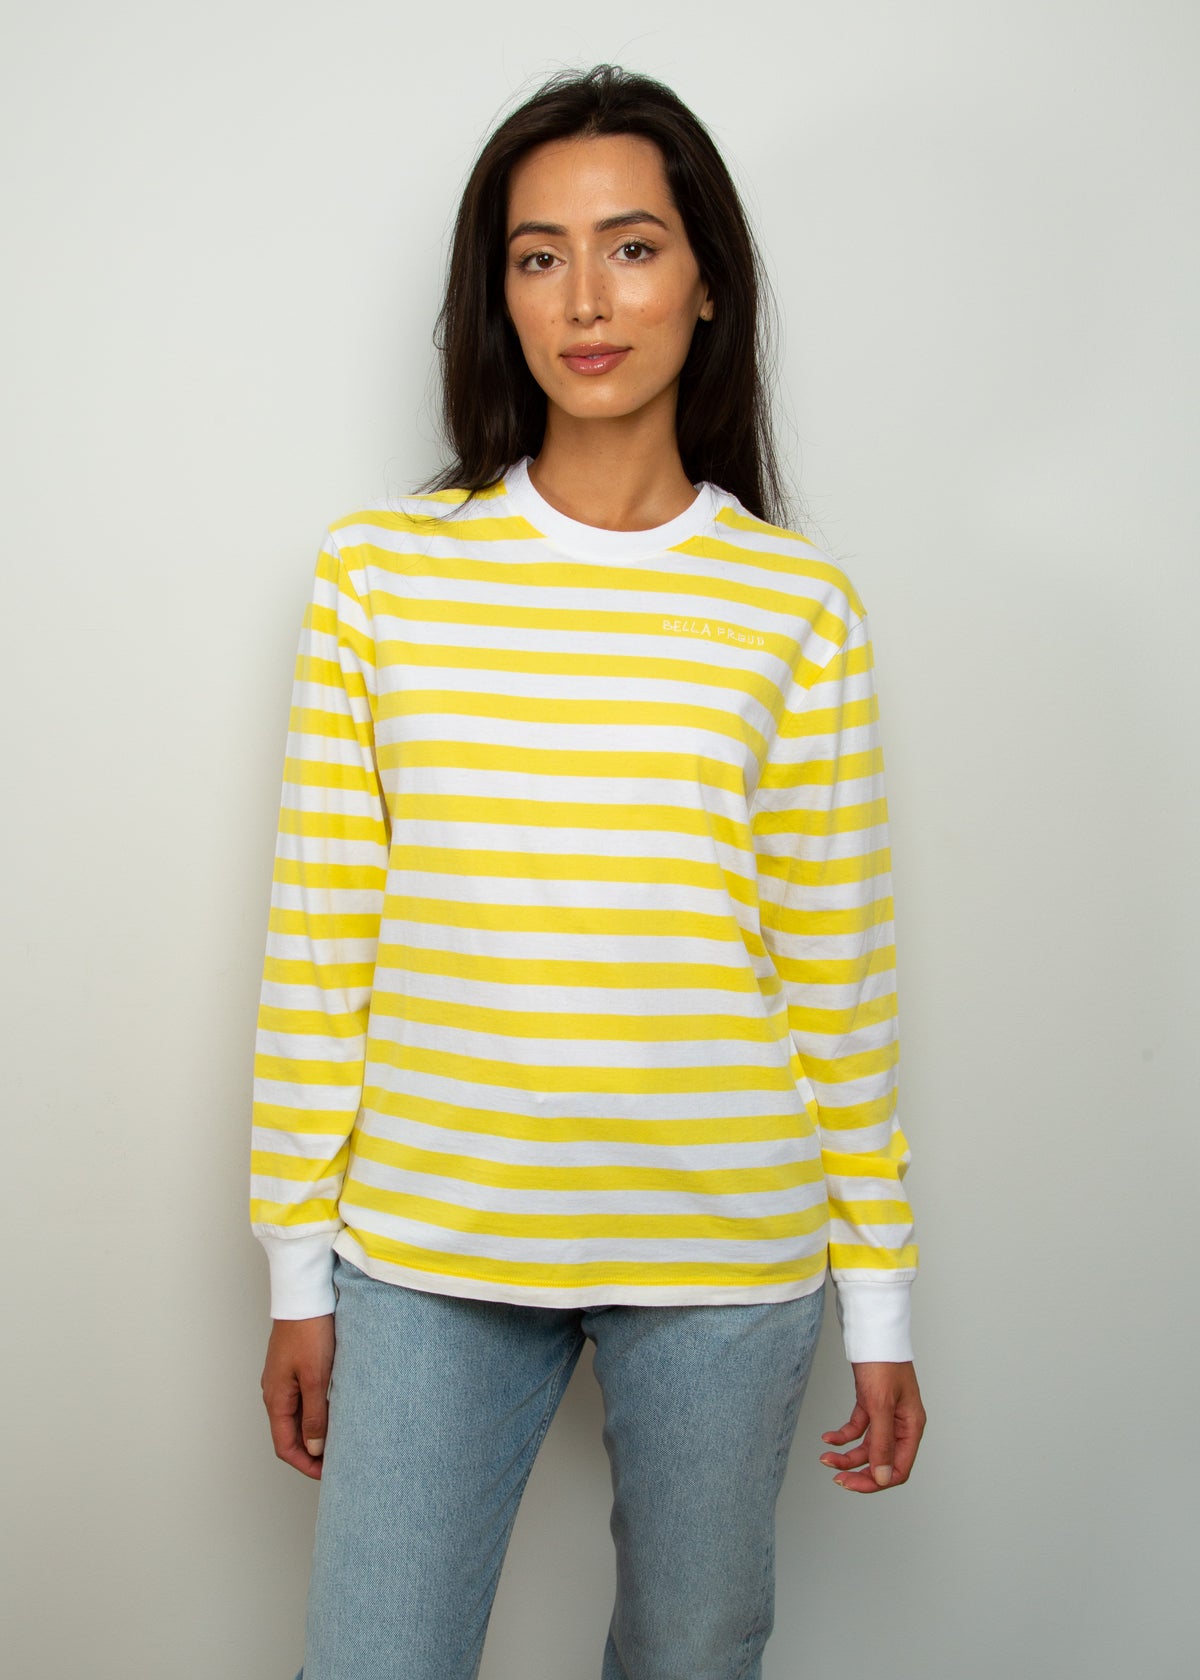 BF LS Striped Top in Yellow, White